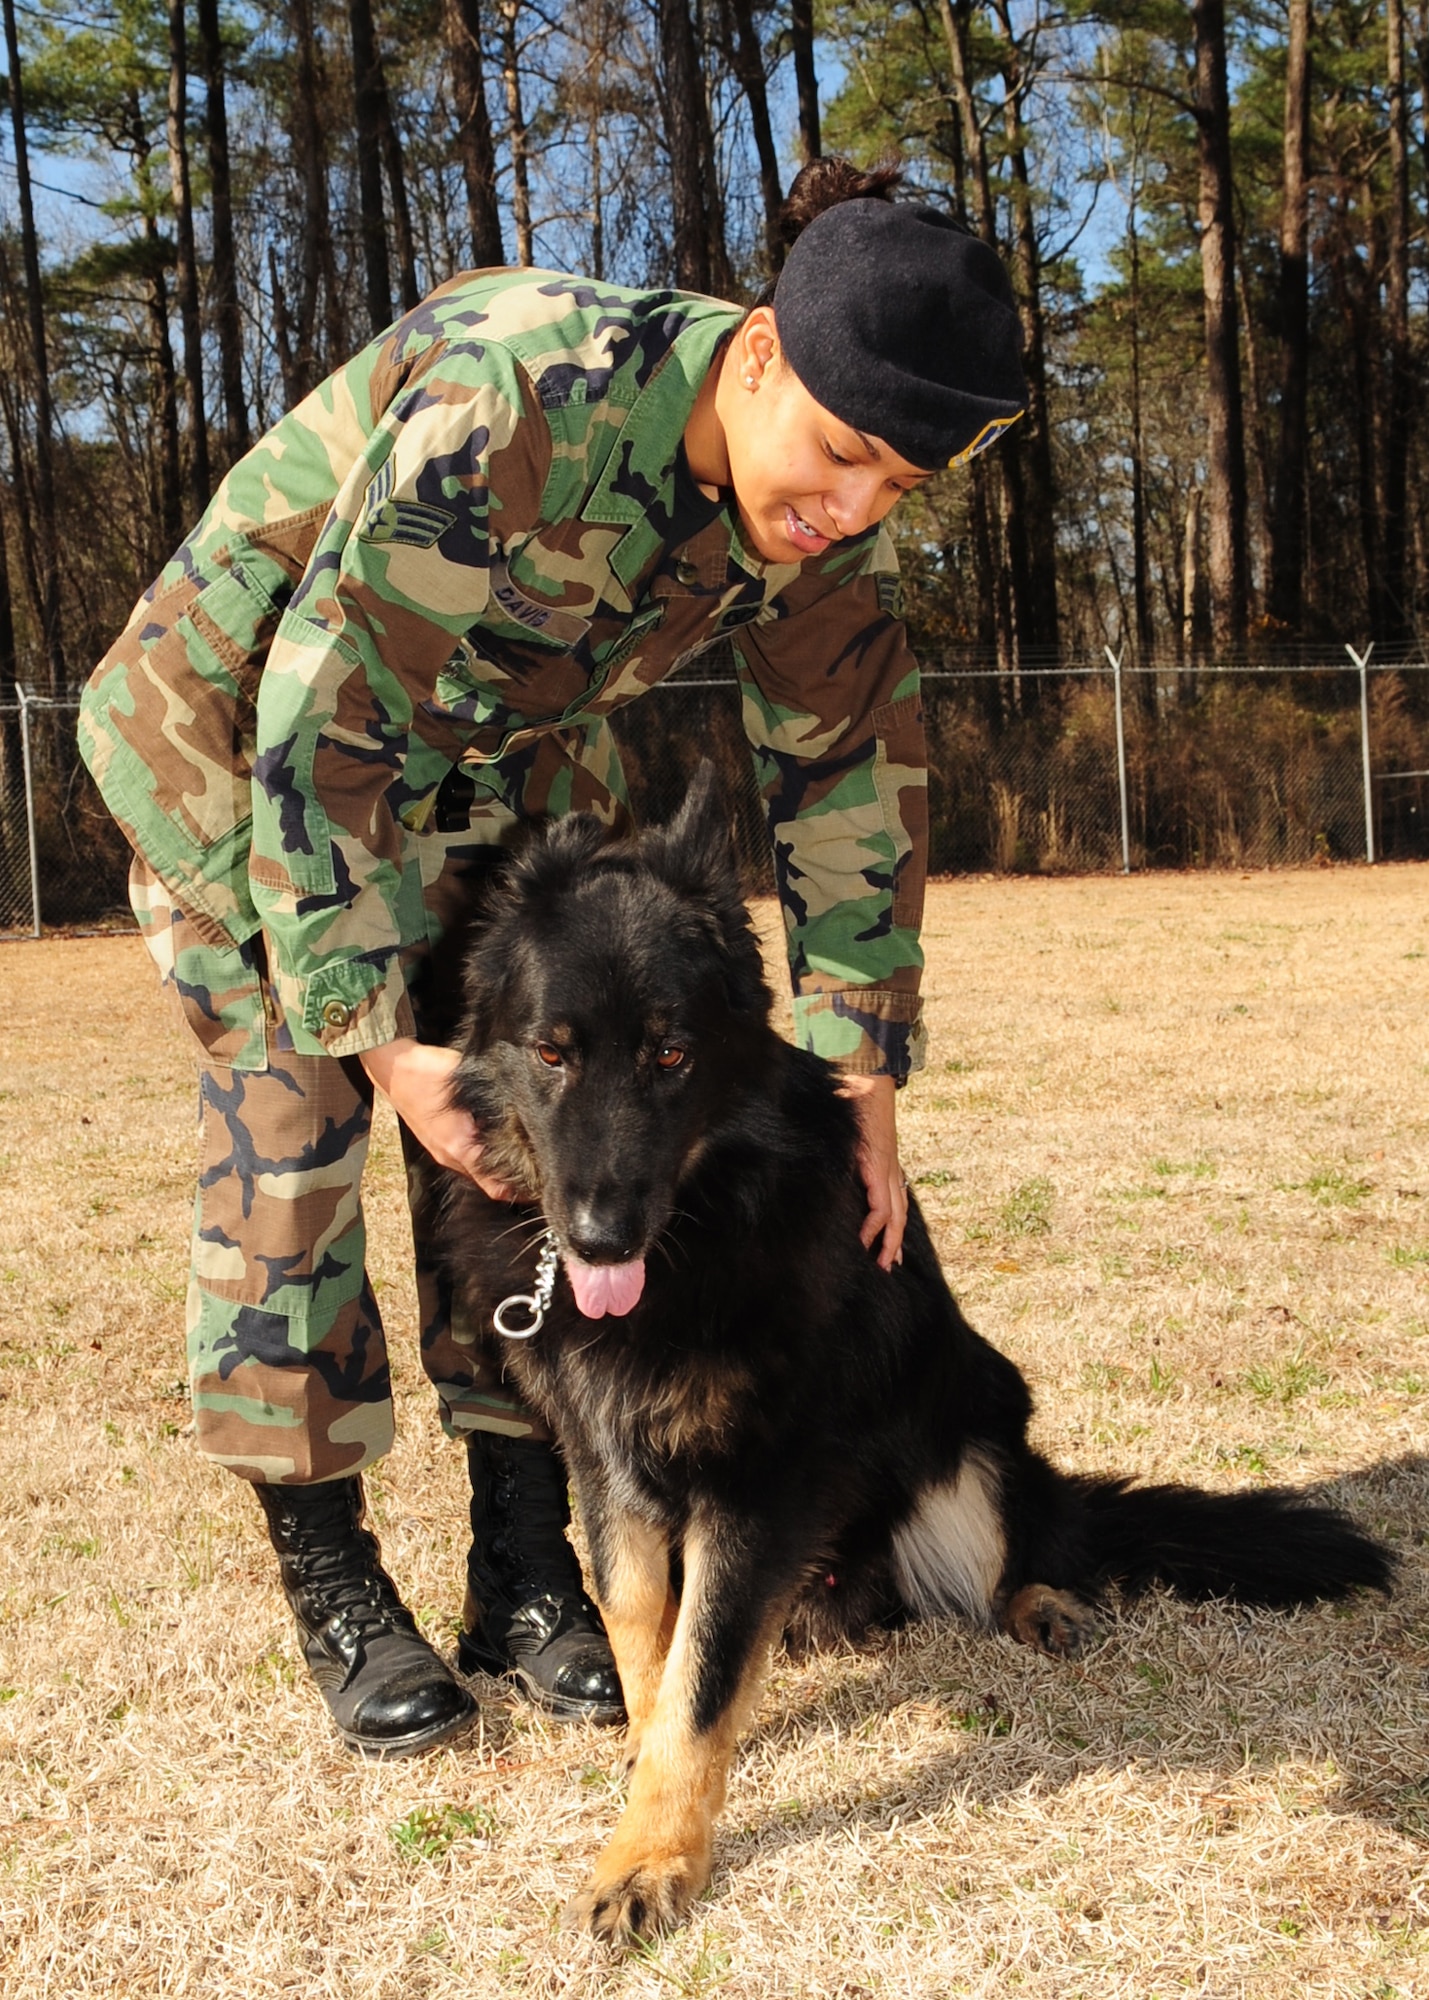 Senior Airman Ava Davis, 4th Security Forces Squadron, praises her military working dog, Frisco, for a job well done after a run through the obstacle course here at Seymour Johnson Air Force Base, N.C. March 4, 2009. Airman Davis and Frisco were named outstanding performers during the 916th Air Refueling Wing’s Nuclear Operational Readiness Inspection by the Air Mobility Command Inspector General that took place a few weeks ago.  (U.S. Air Force Photo by Airman 1st Class Rae A. Perry)